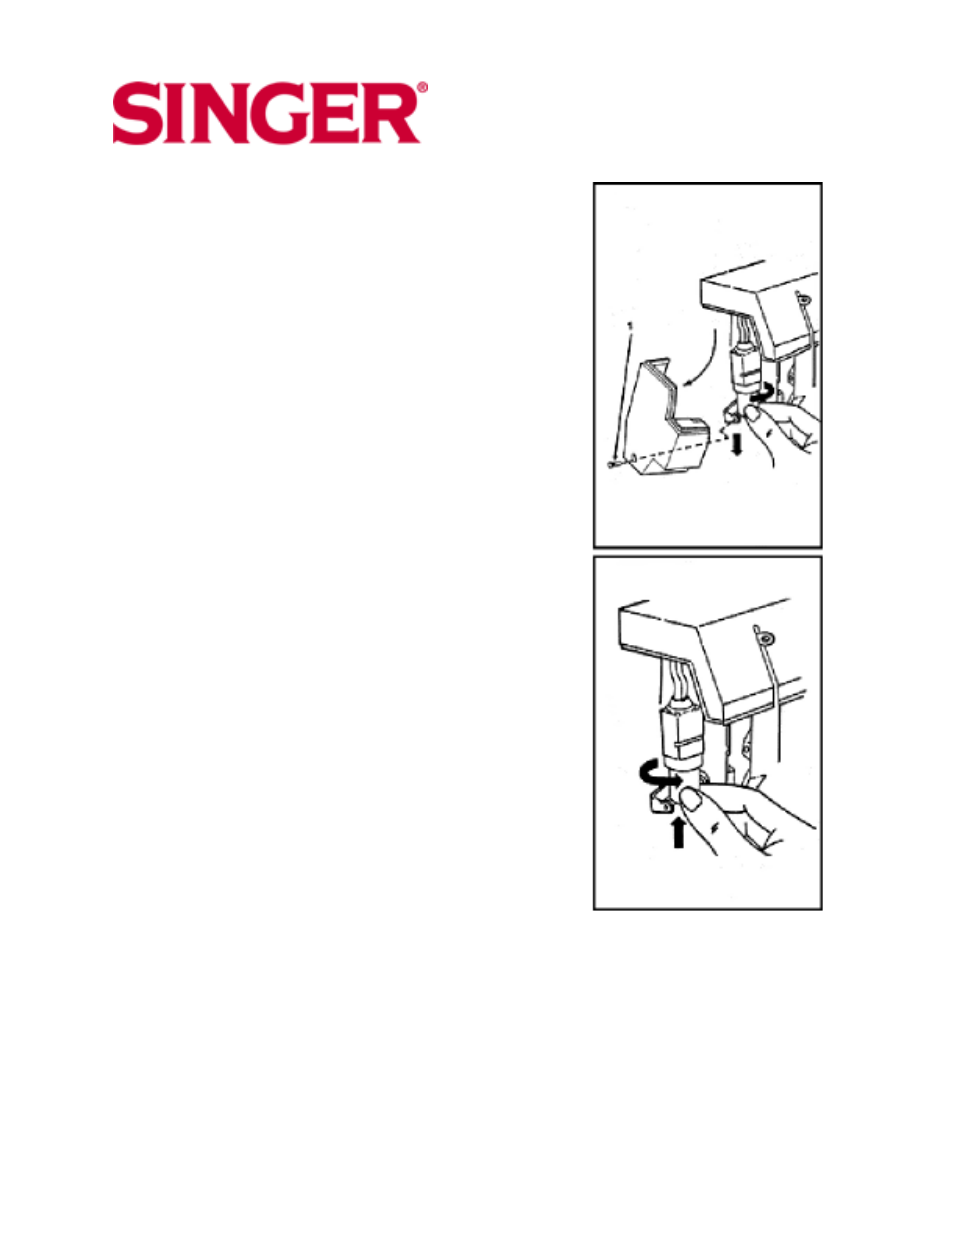 Changing the light bulb | SINGER 10 User Manual | Page 42 / 47